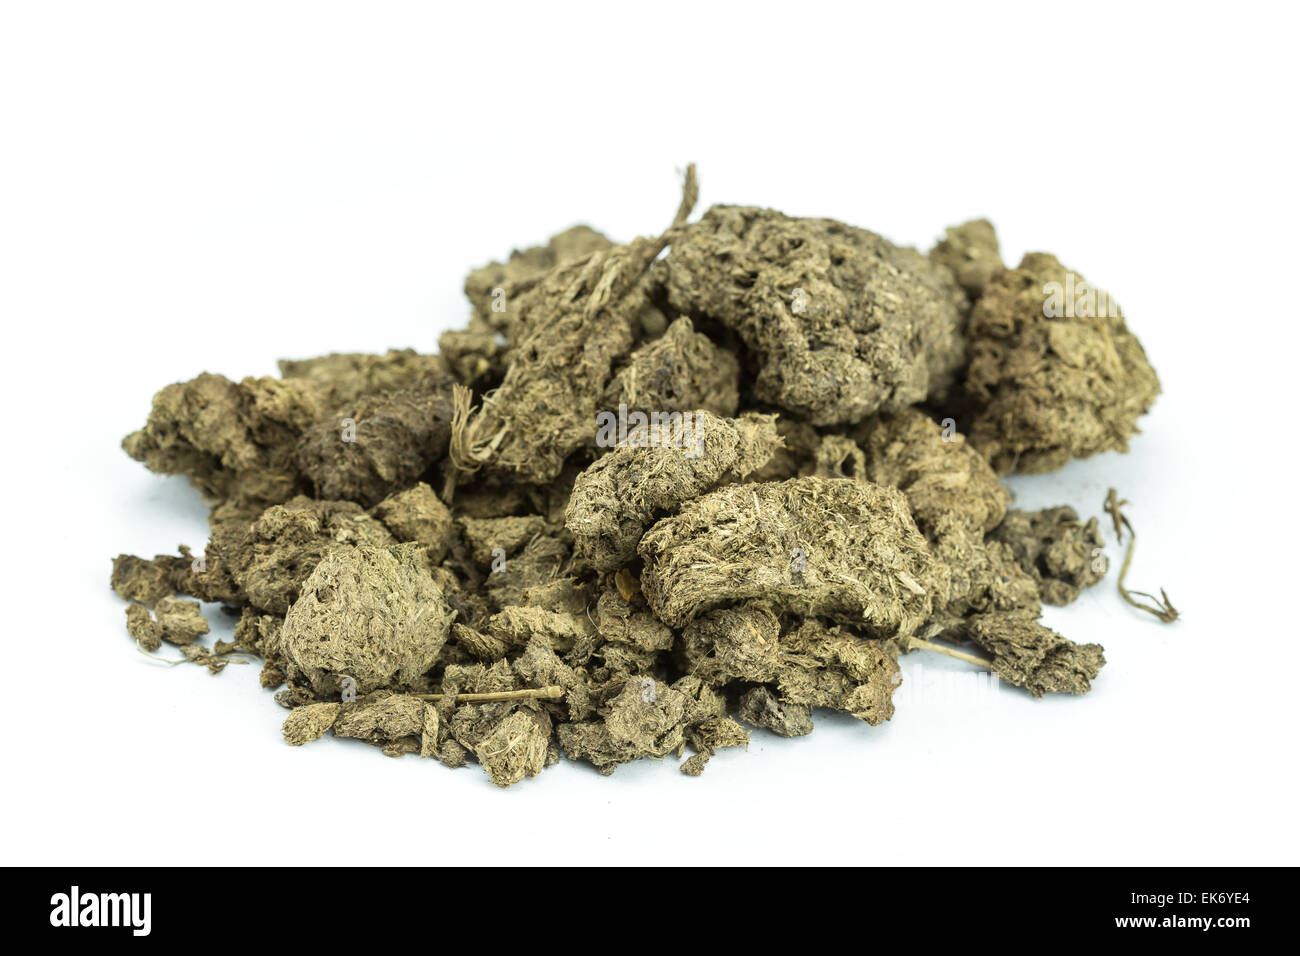 Pile of dry cow manure isolated on white background Stock Photo